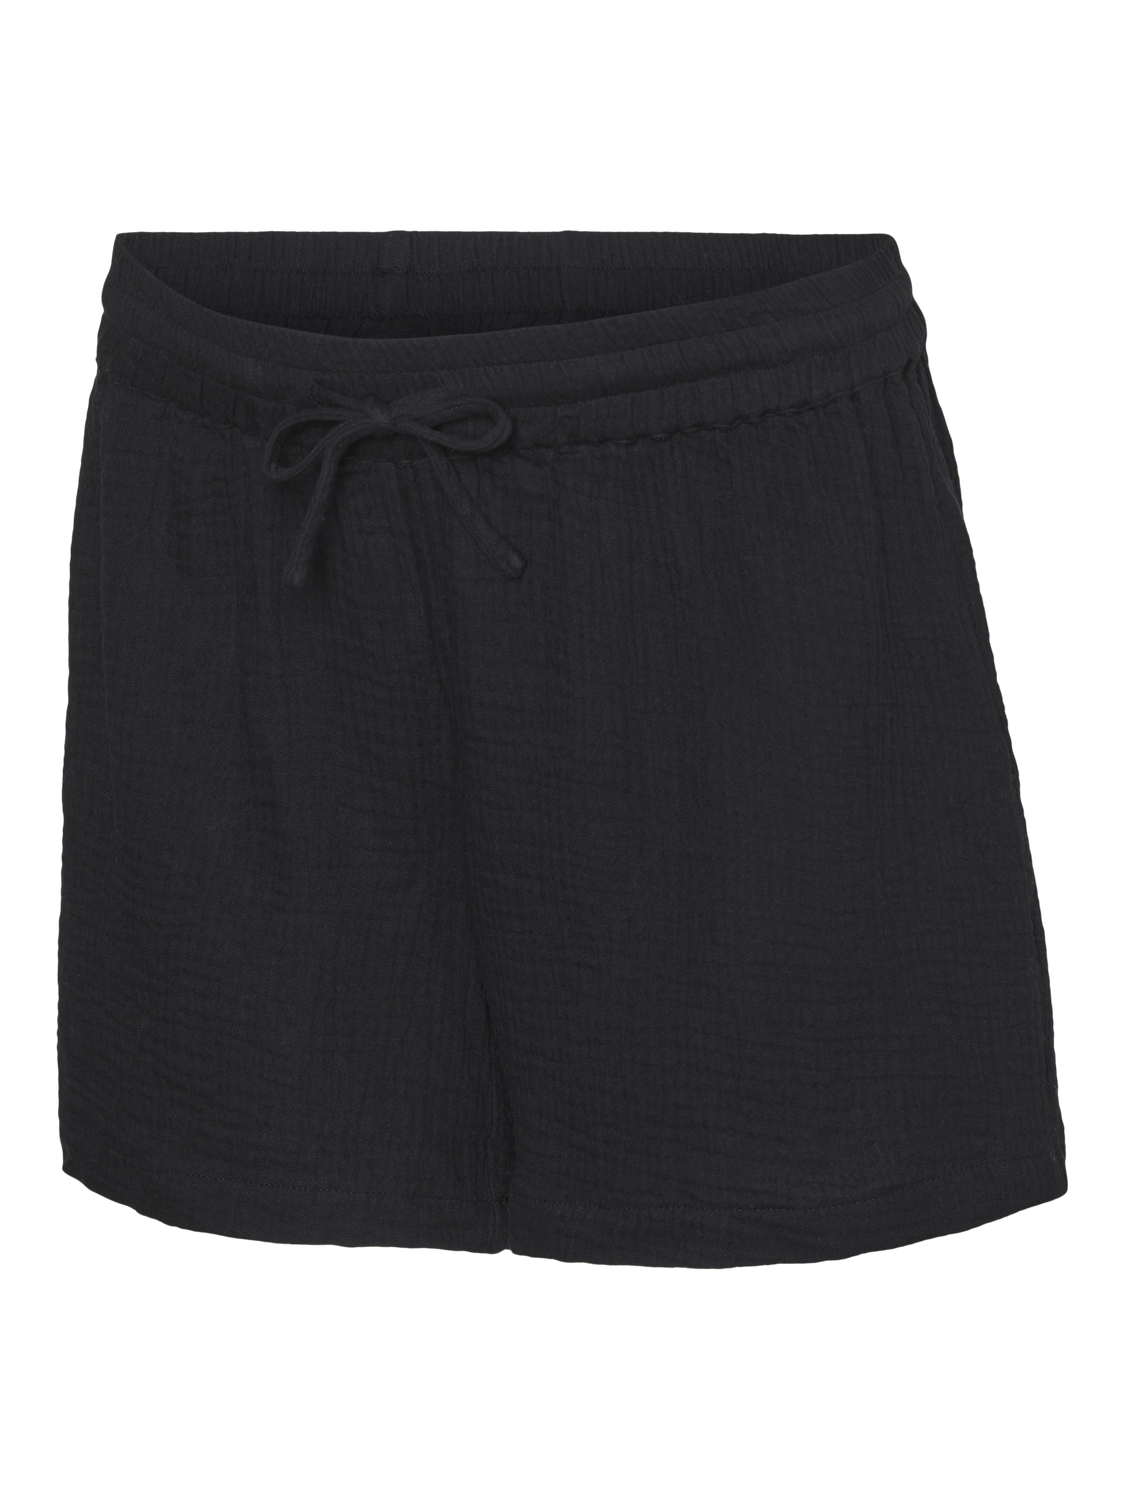 MAMA.LICIOUS Shorts Regular Fit Taille basse -Black - 20020211